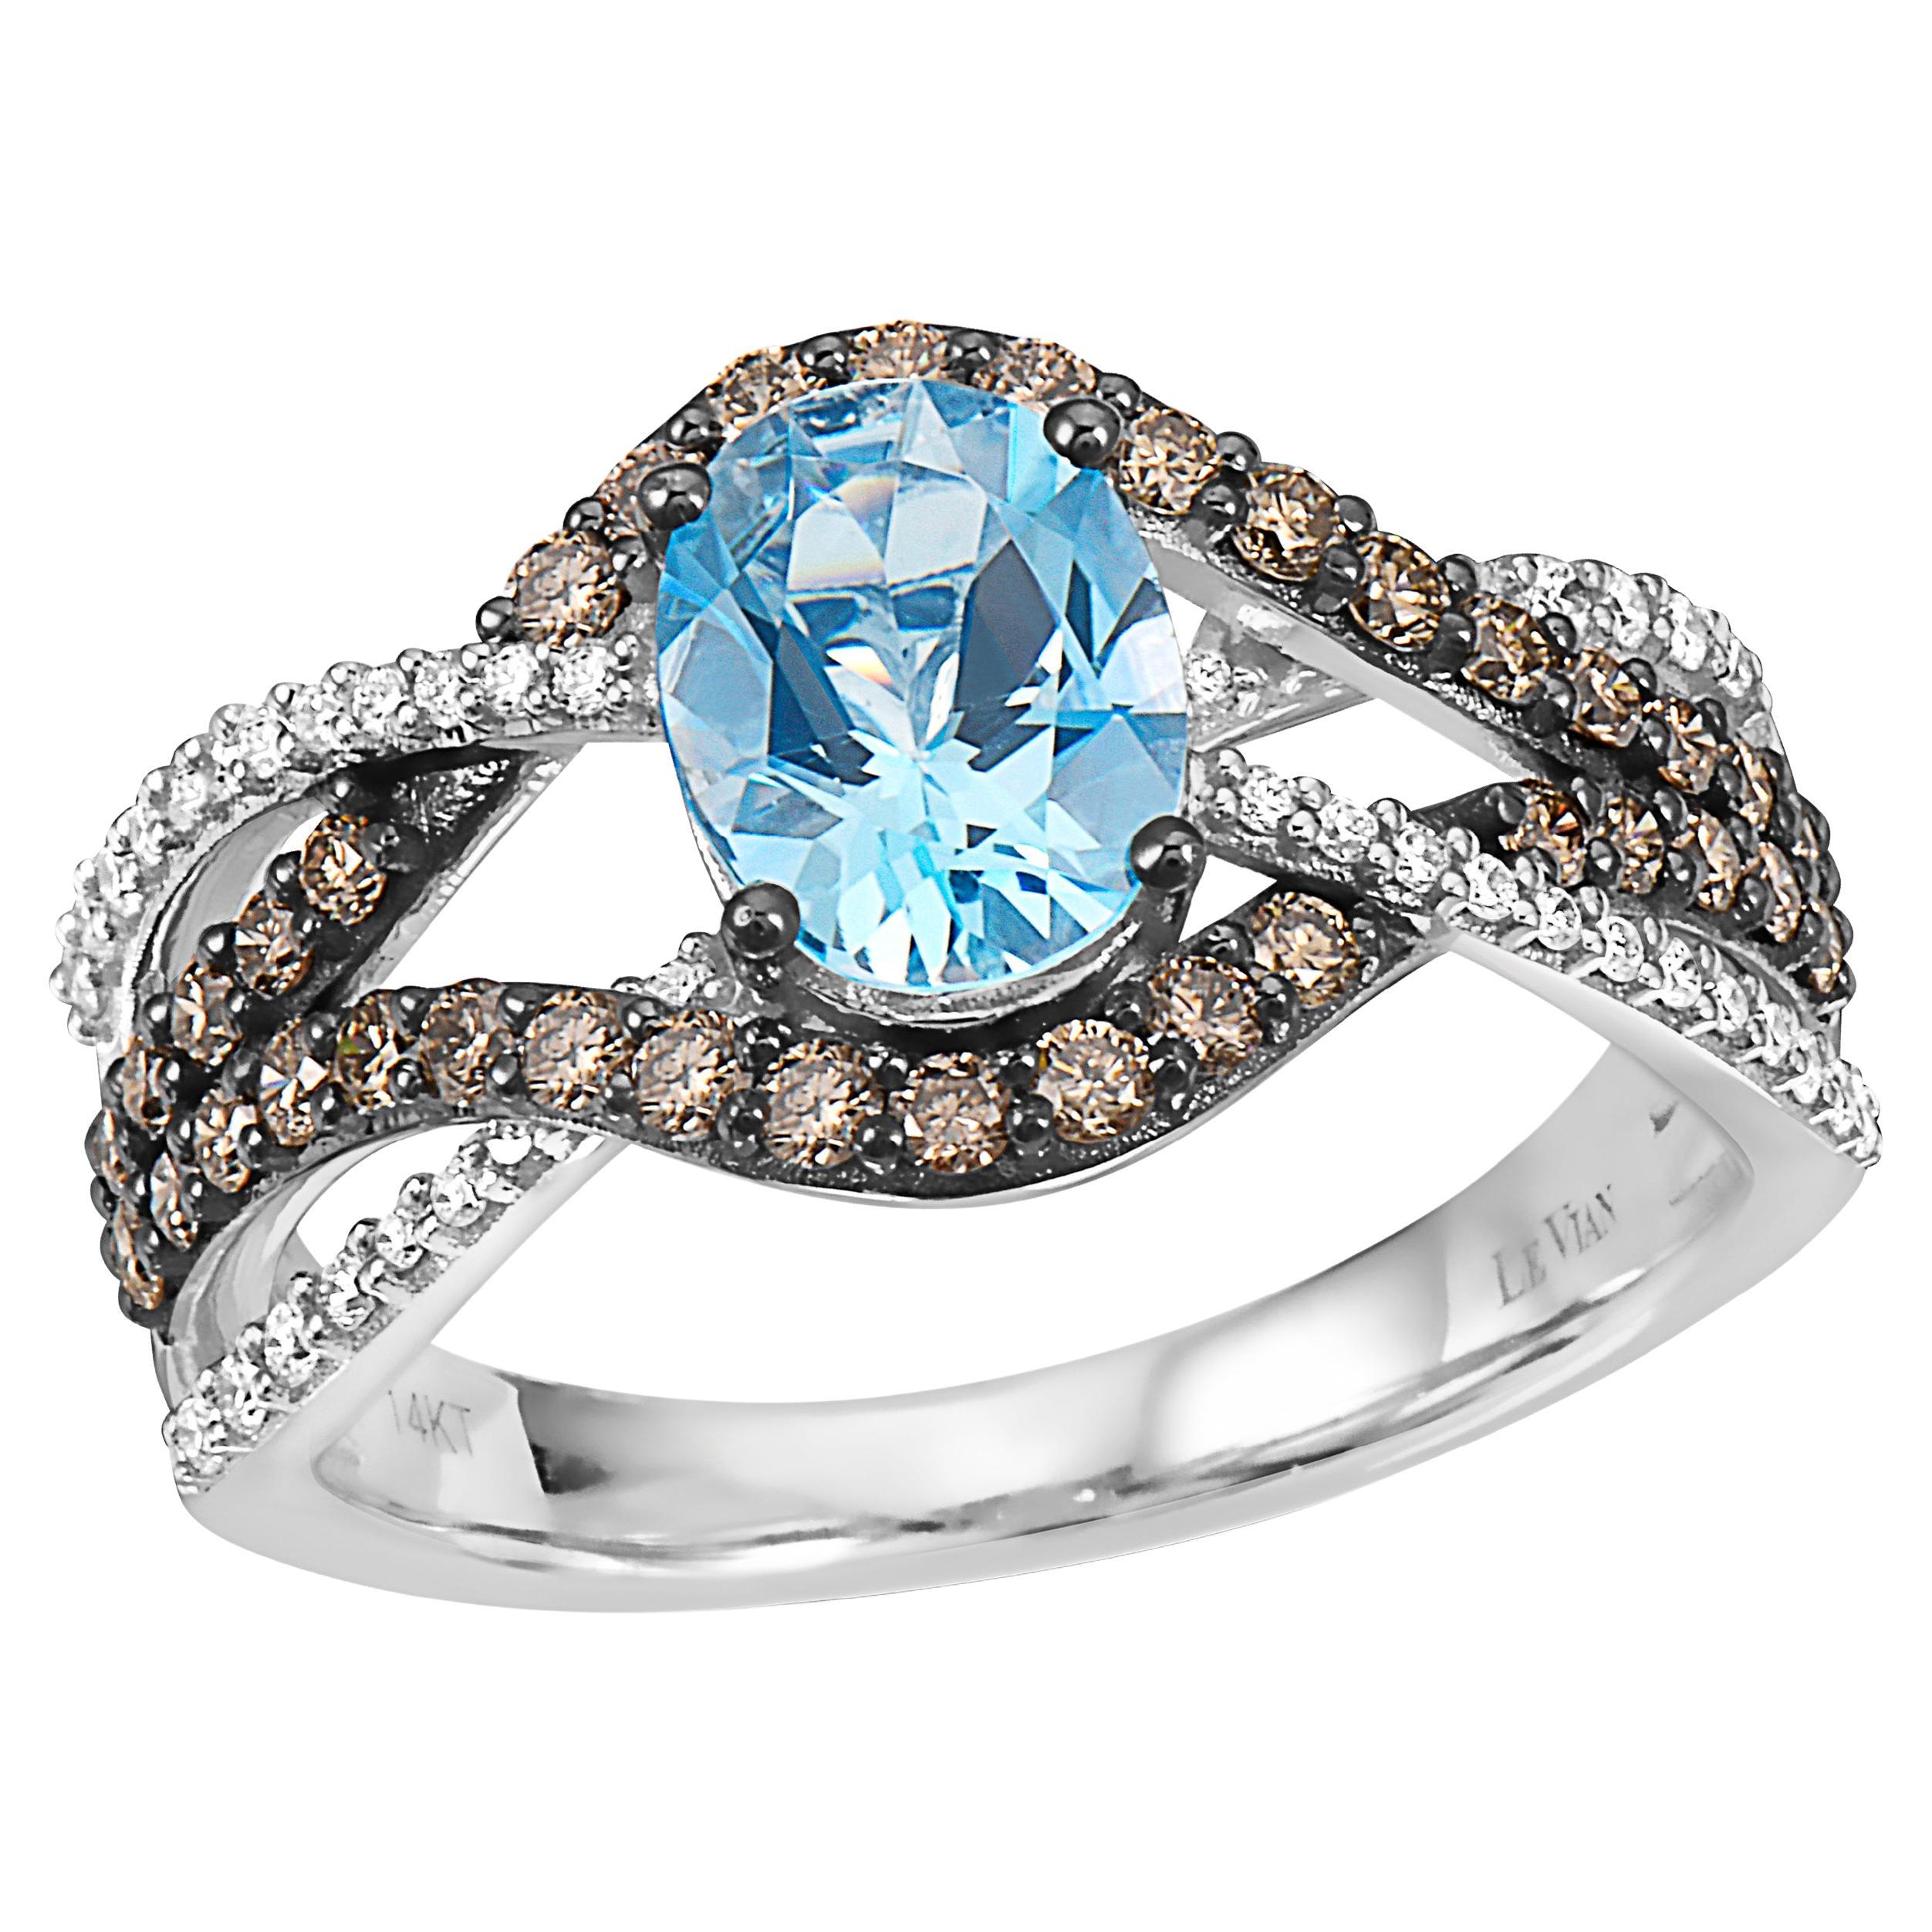 LeVian Ring Blue Topaz Chocolate & White Diamond in 14K White Gold For Sale